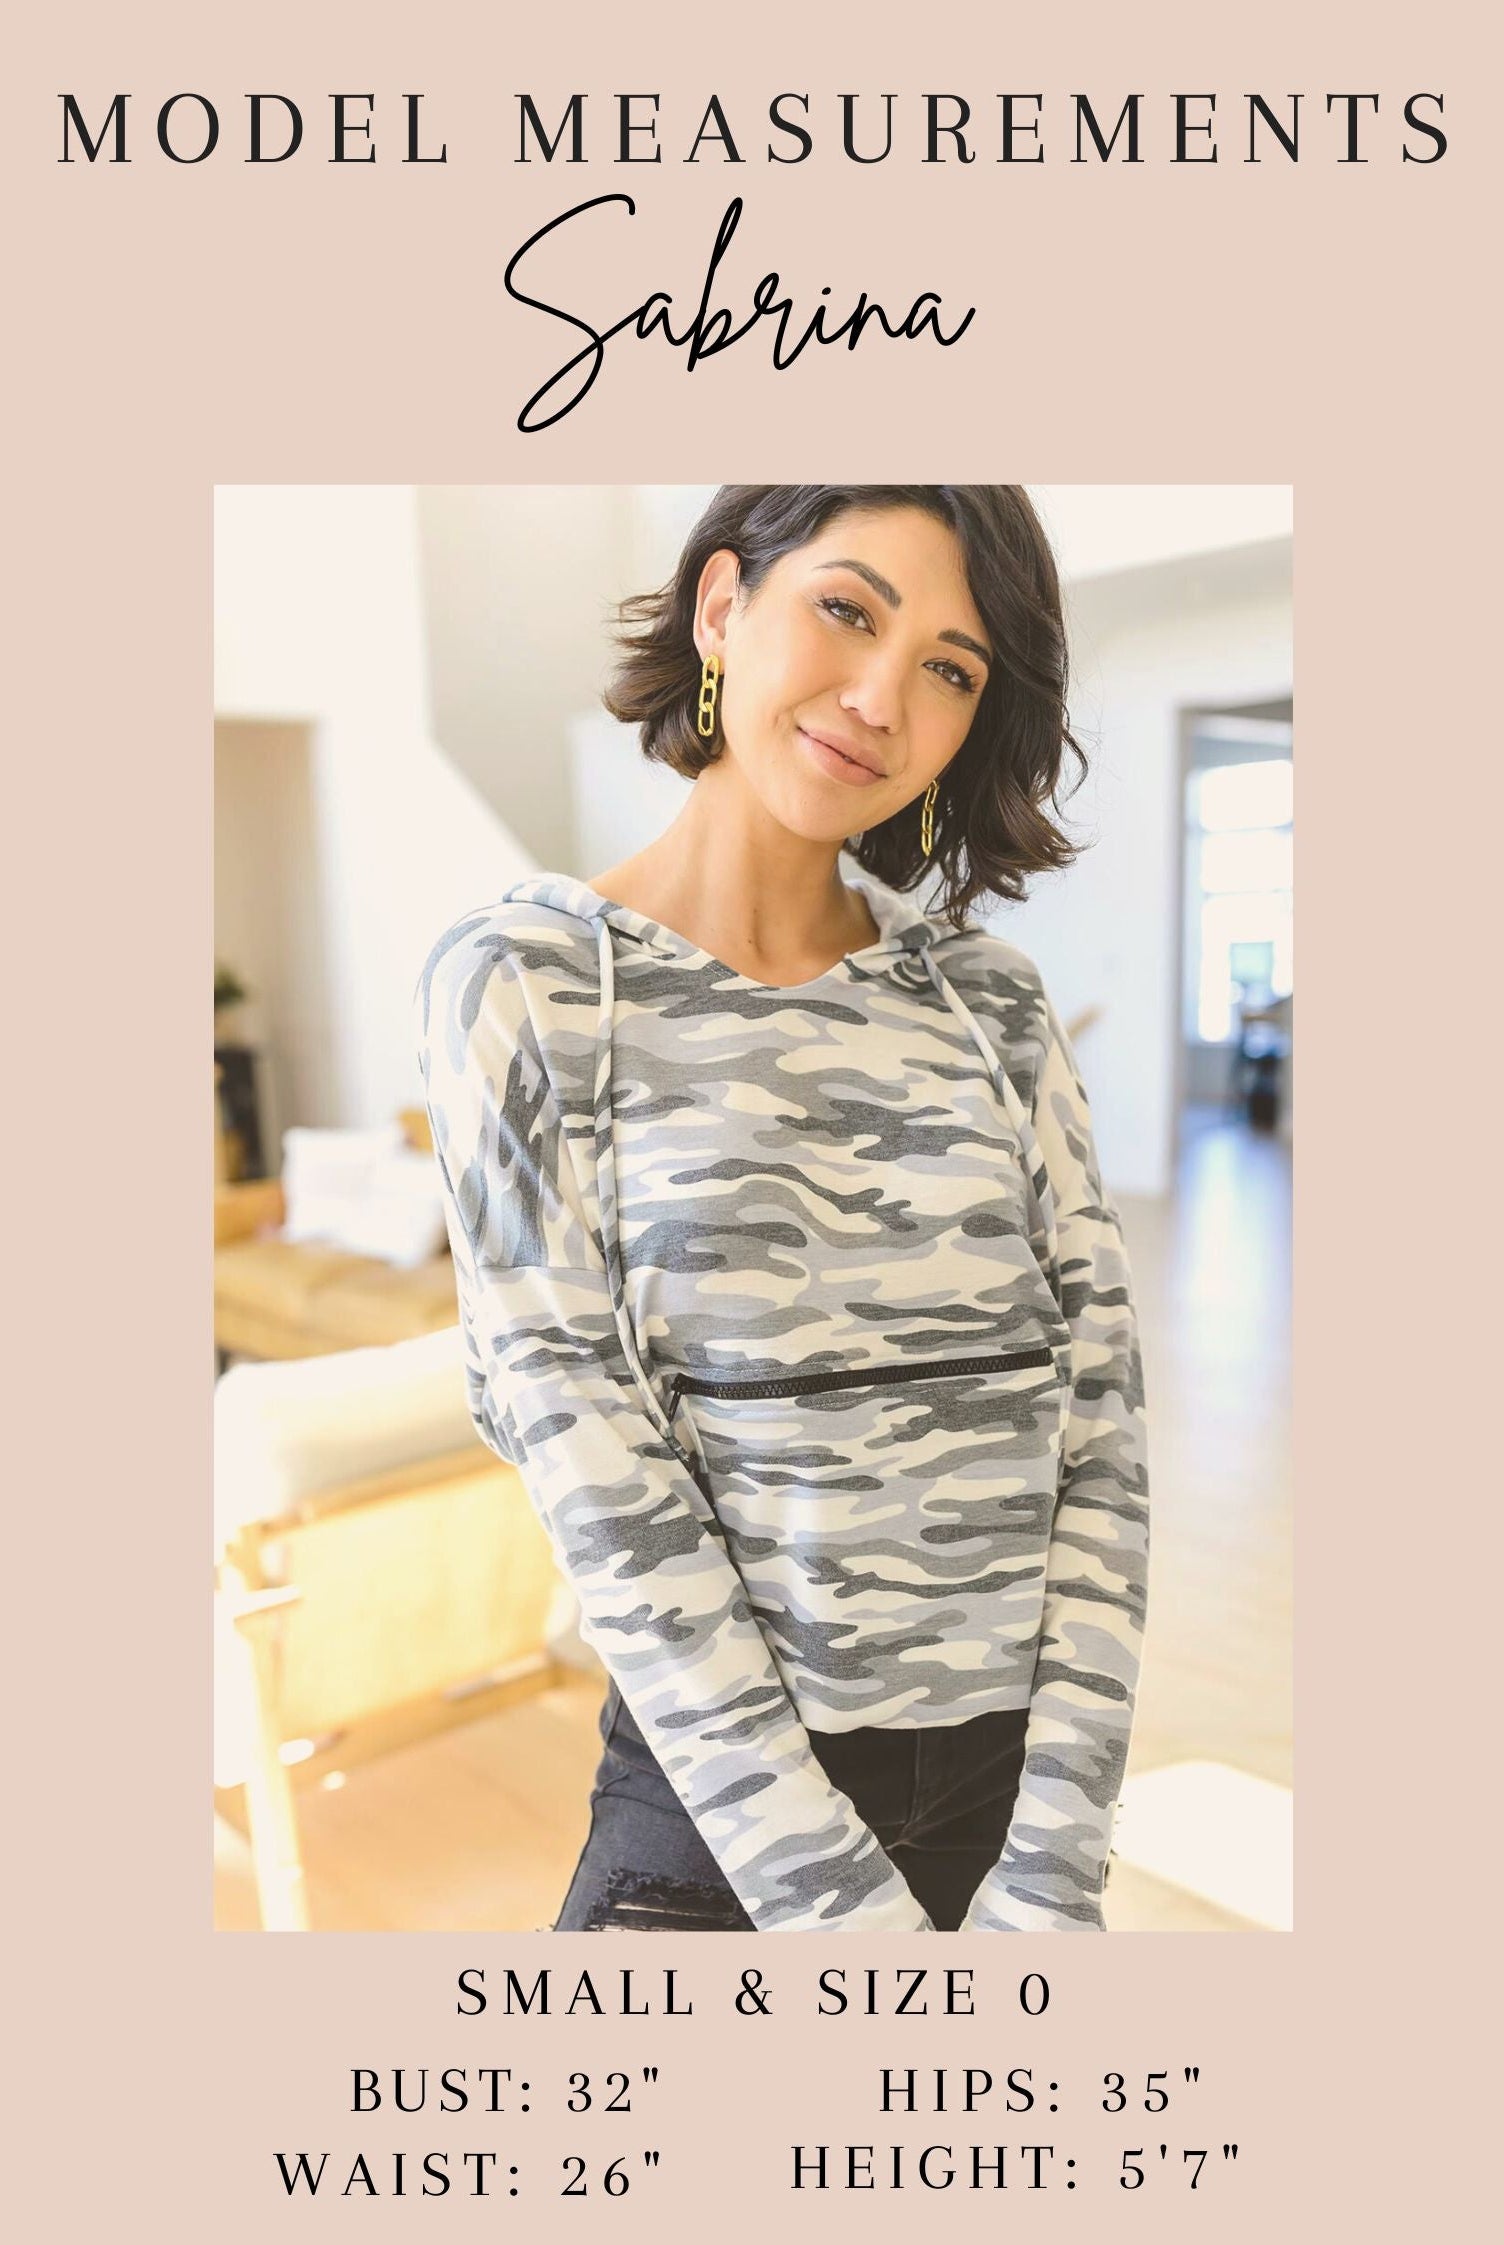 Are We There Yet? Striped Sweater-Sweaters-Krush Kandy, Women's Online Fashion Boutique Located in Phoenix, Arizona (Scottsdale Area)